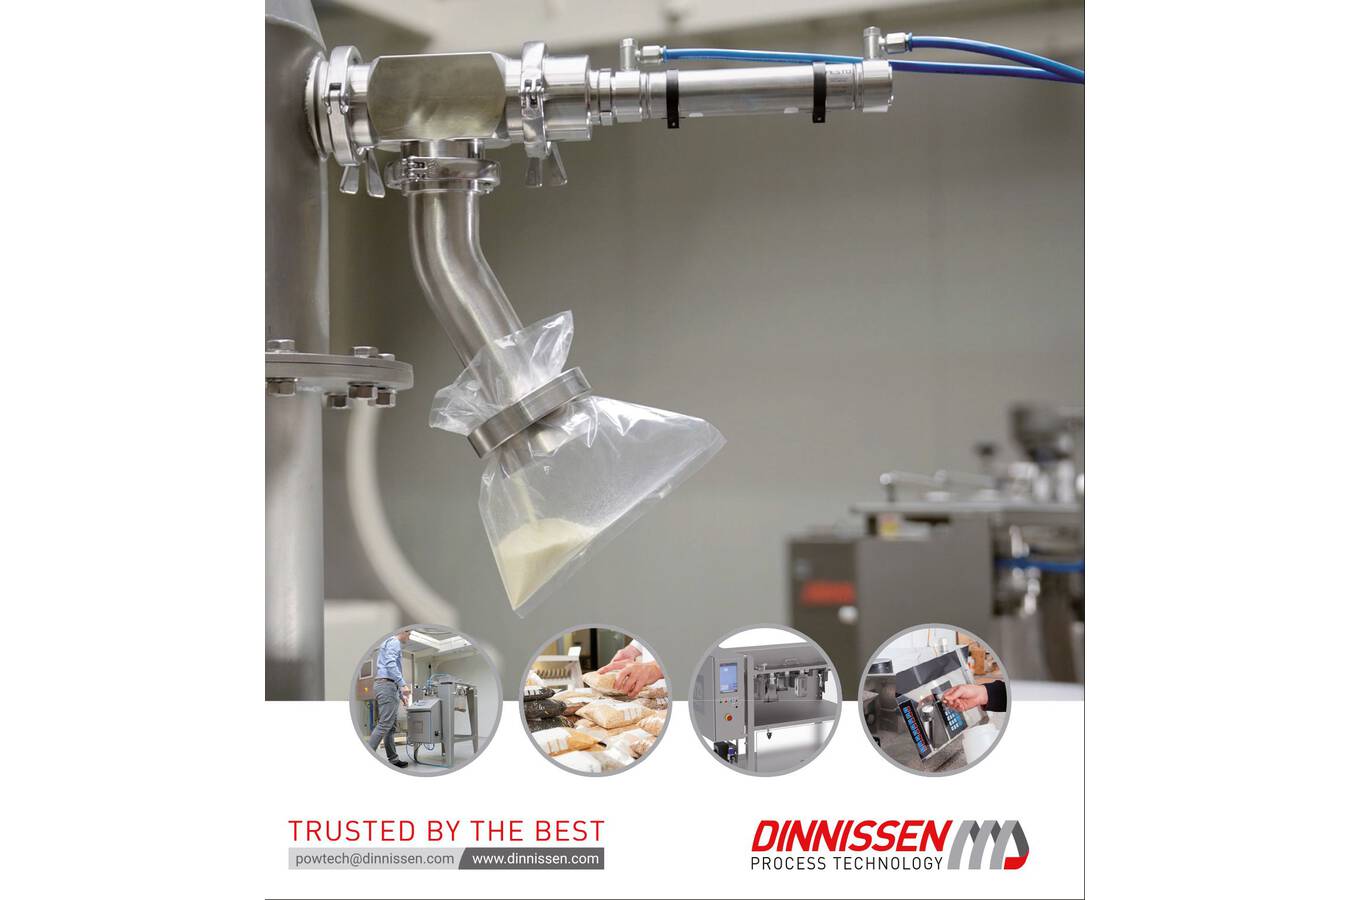 Video from Dinnissen about sampling systems Dinnissen shows its sampling solutions in a video: from plunger and screw samplers to automatic samplng with the Multi-Size Sample Carousel